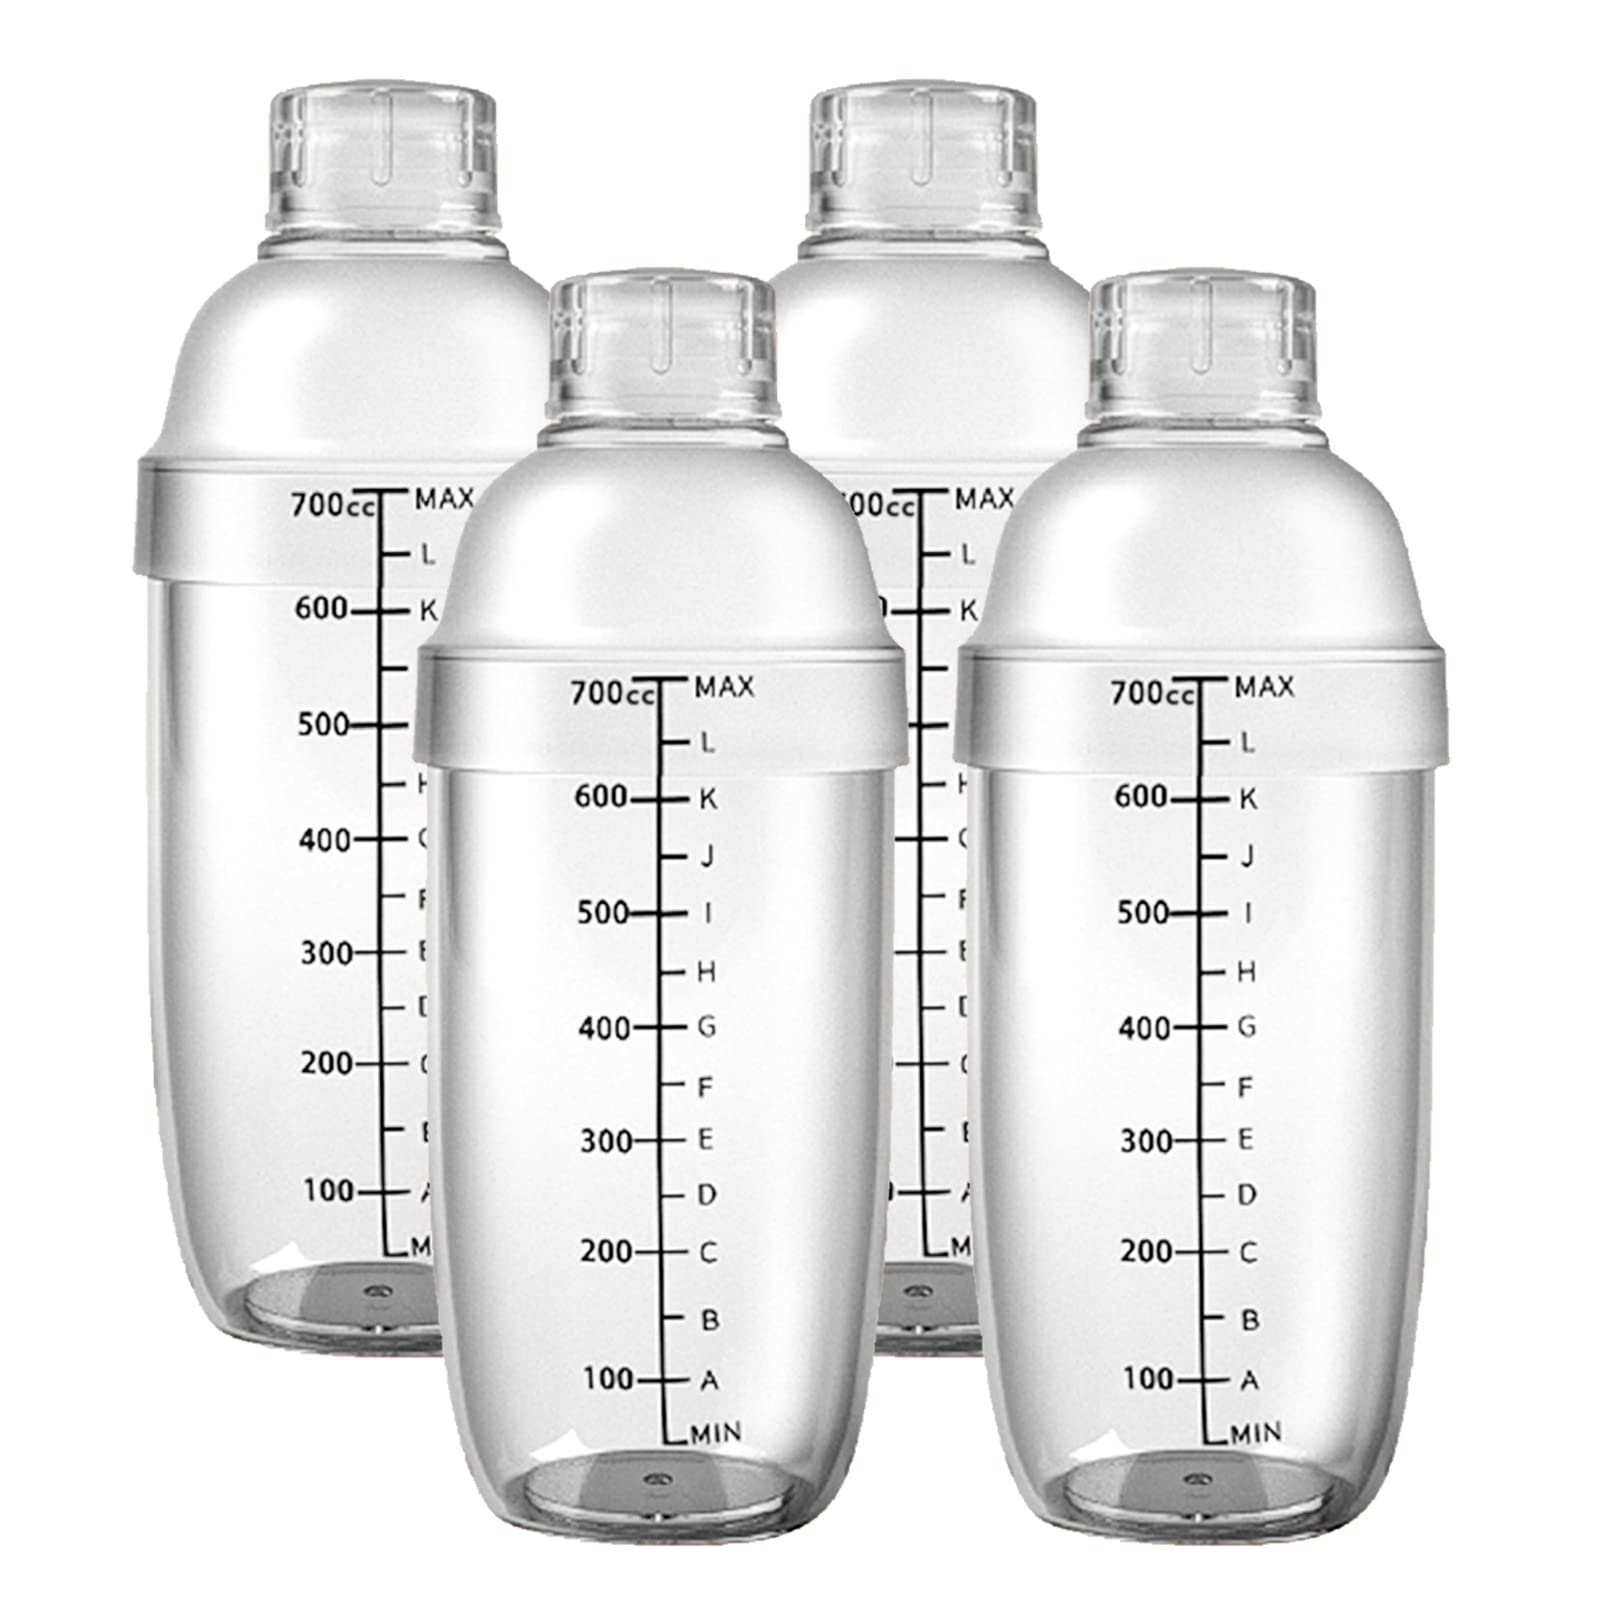 4 Pcs 700CC/24Oz Plastic Cocktail Shaker Drink Mixer Hand Shaker Cup with Scales Transparent(4, 700cc)